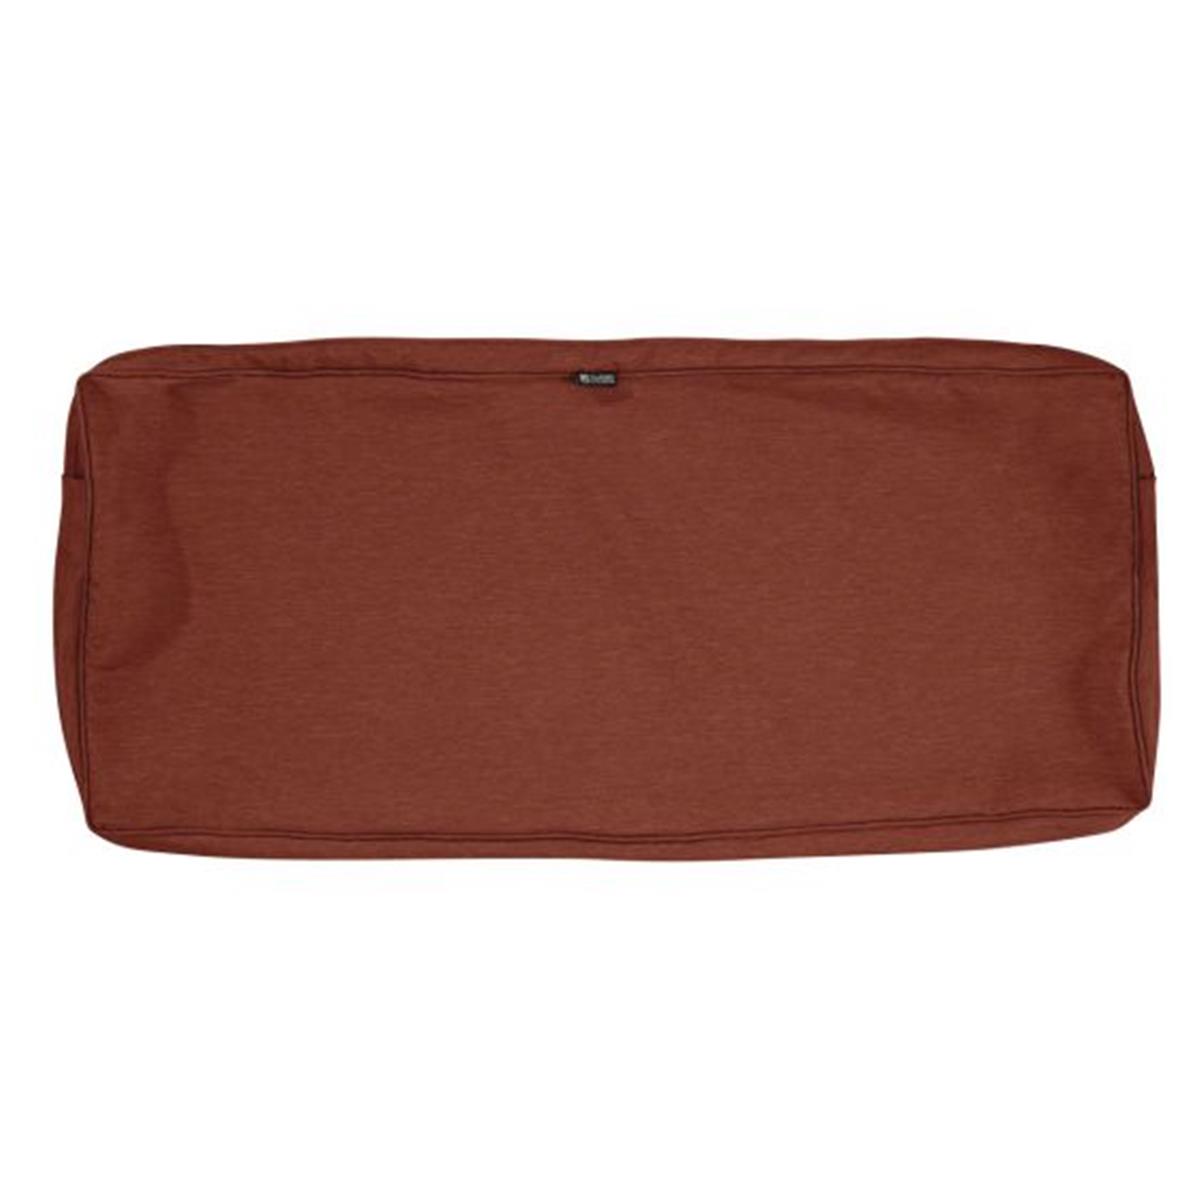 Picture of Classic Accessories 60-110-016601-RT Montlake Fadesafe Rectangle Bench Cushion Cover - Heather Henna Red, 48 x 18 x 3 in.